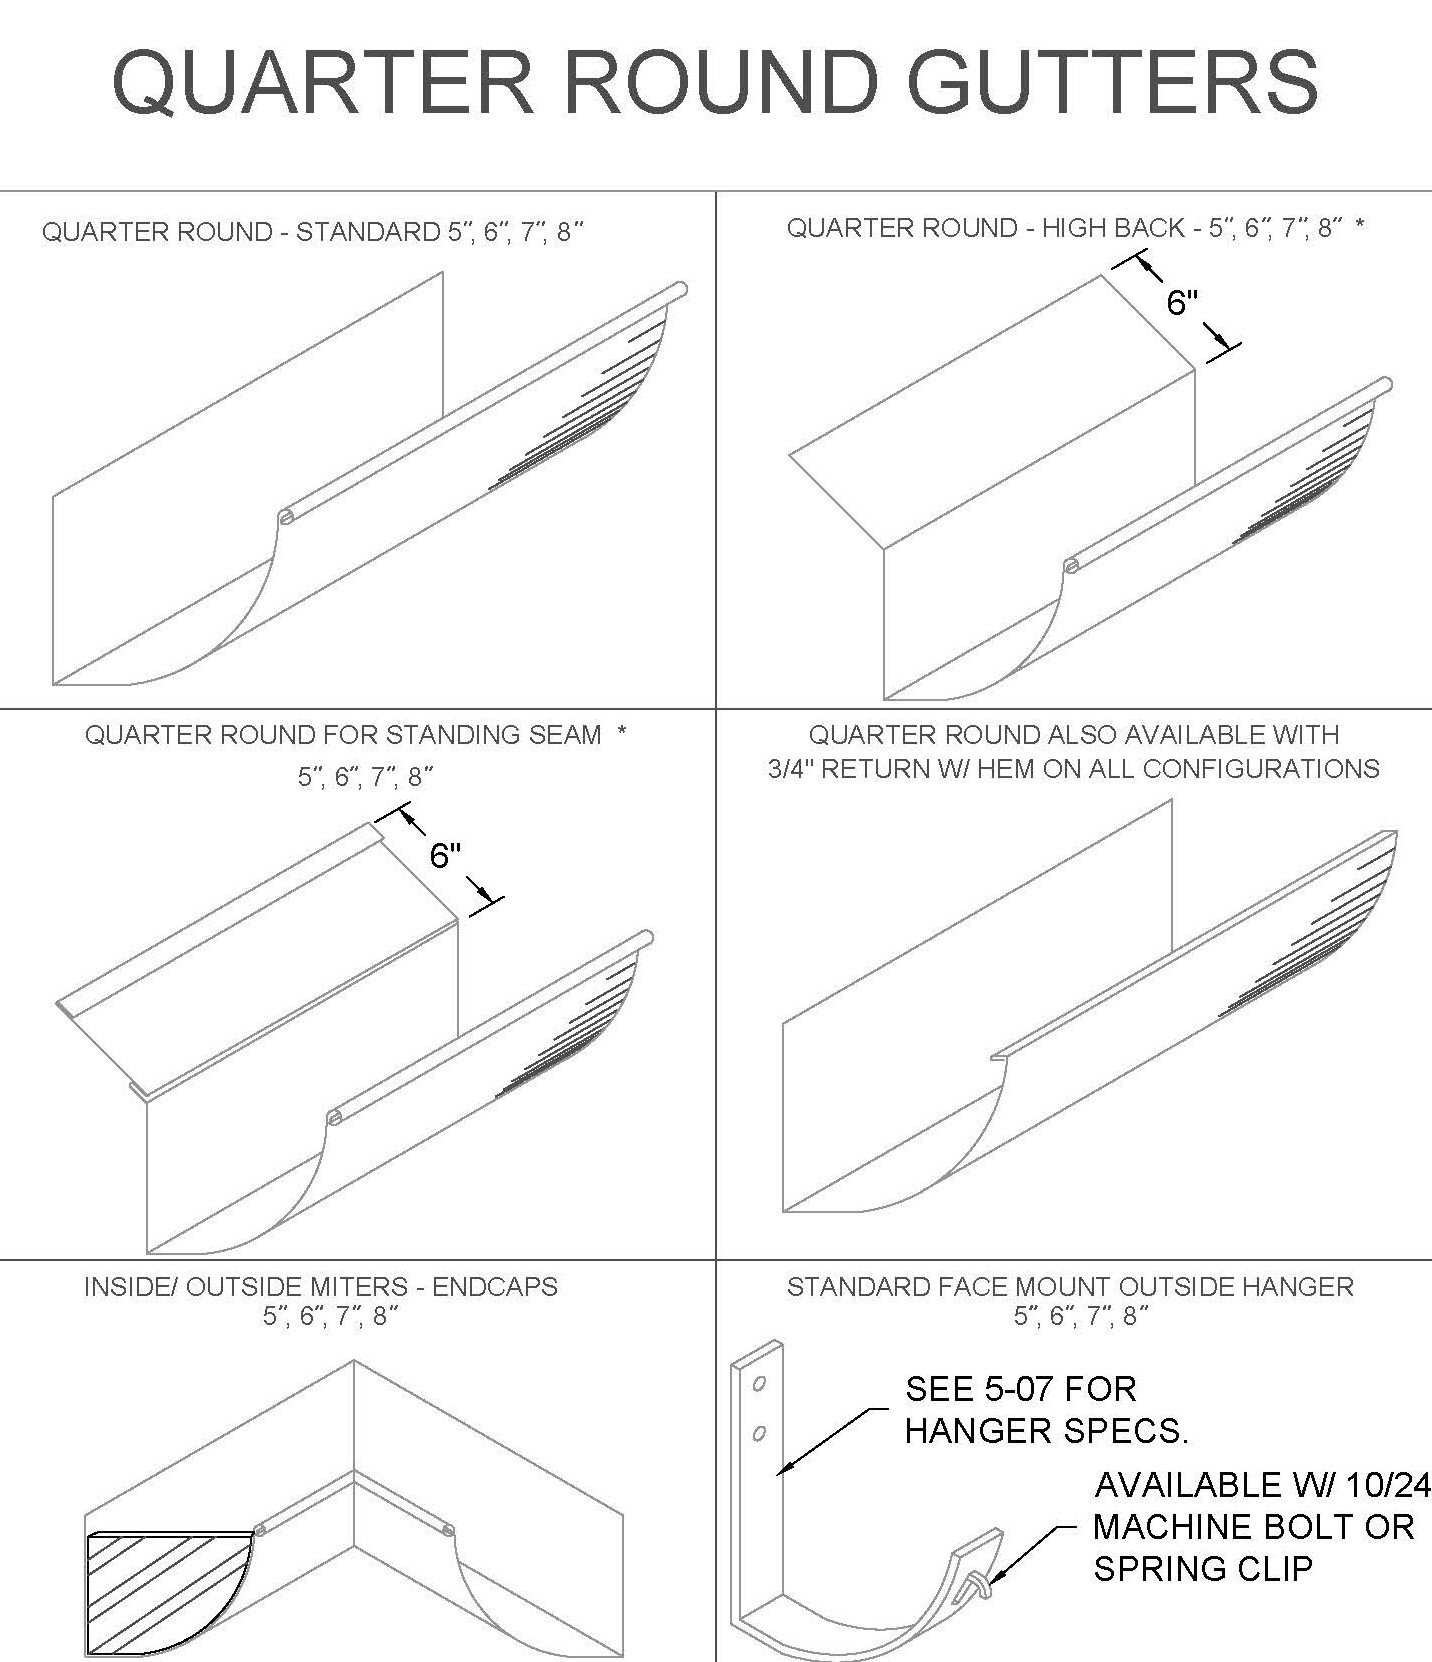 Quarter Round Gutters and Accessories DETAIL